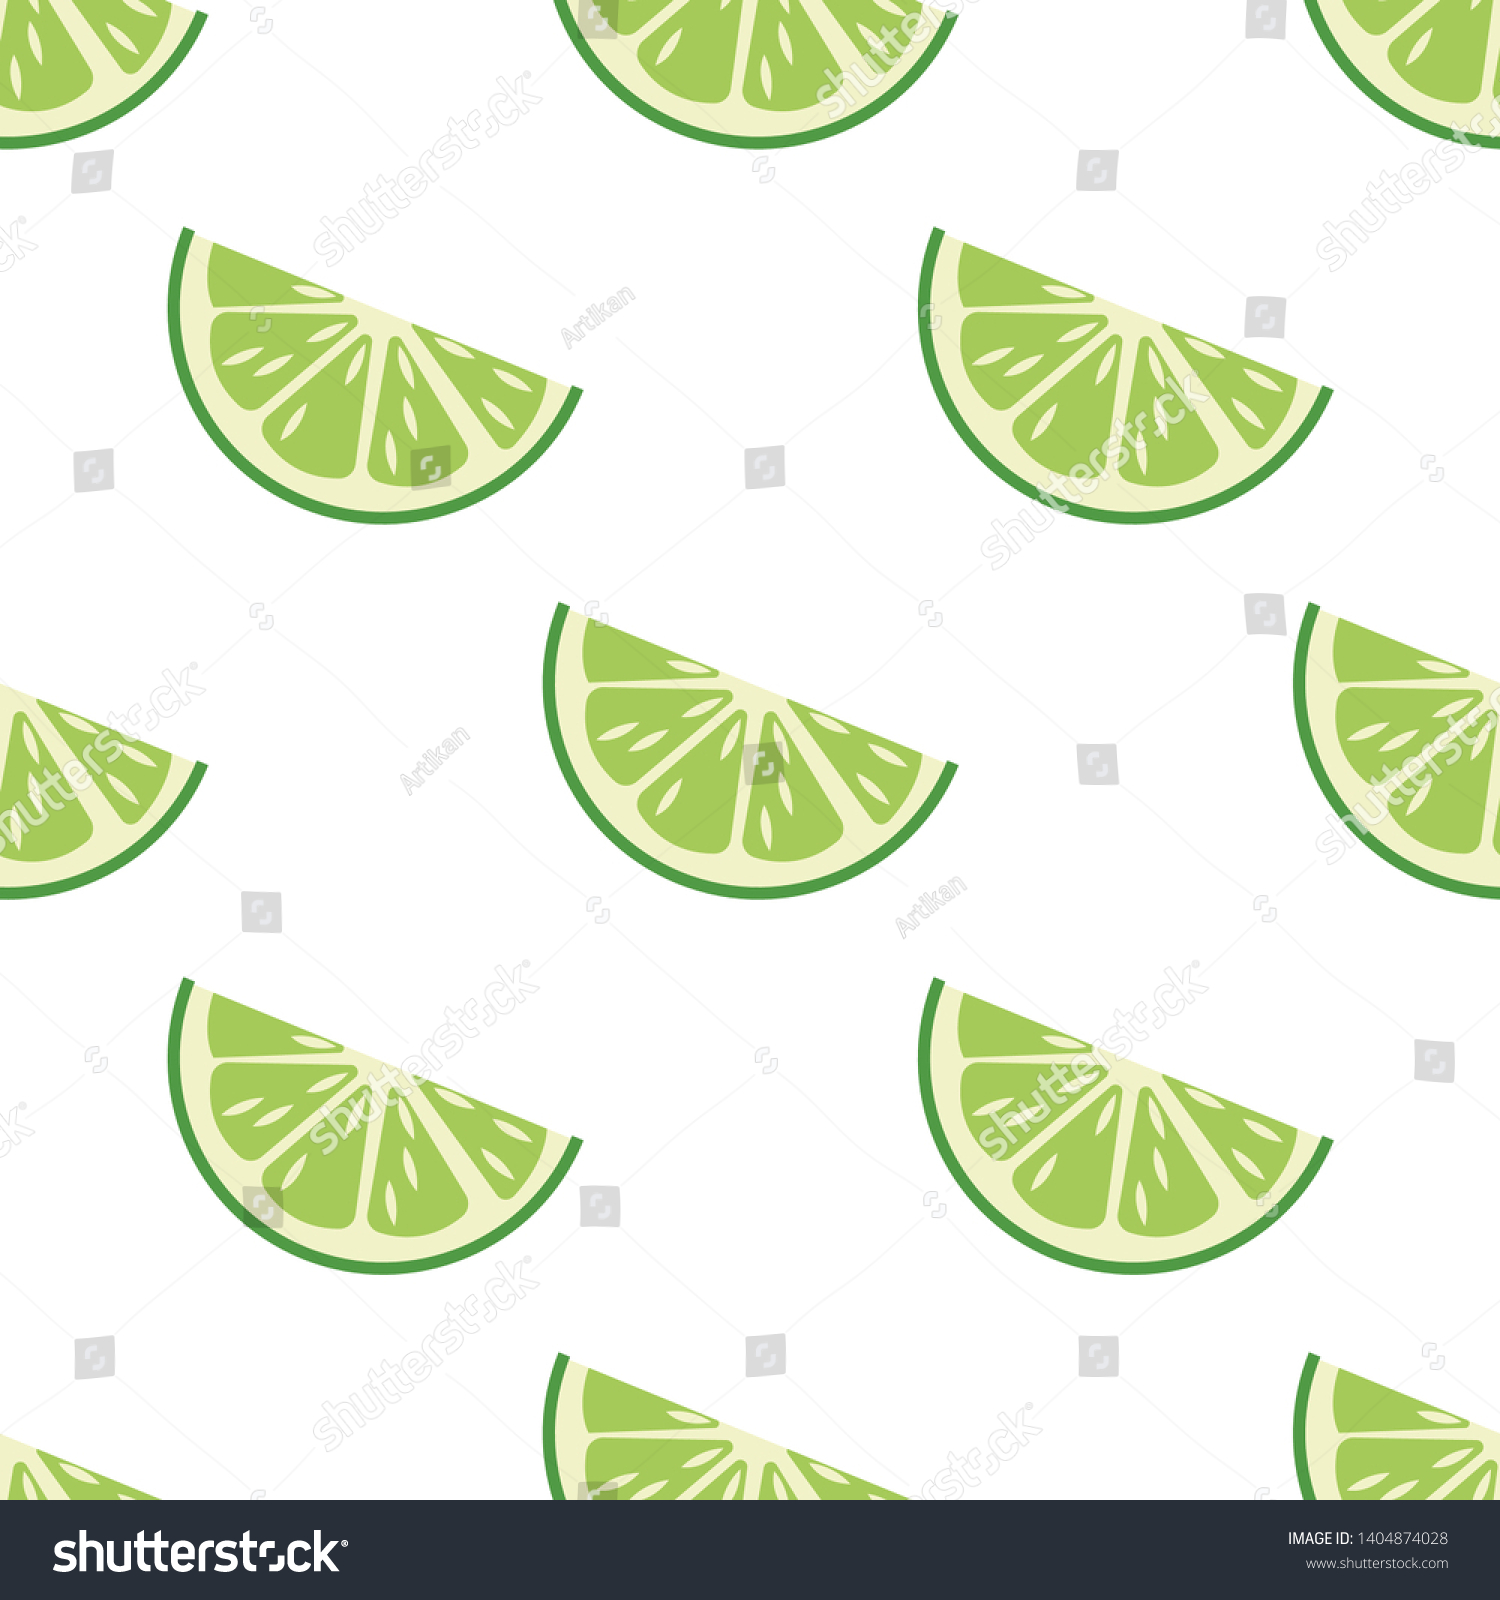 Pattern of slice of lime. Vector illustration in cartoon style #1404874028